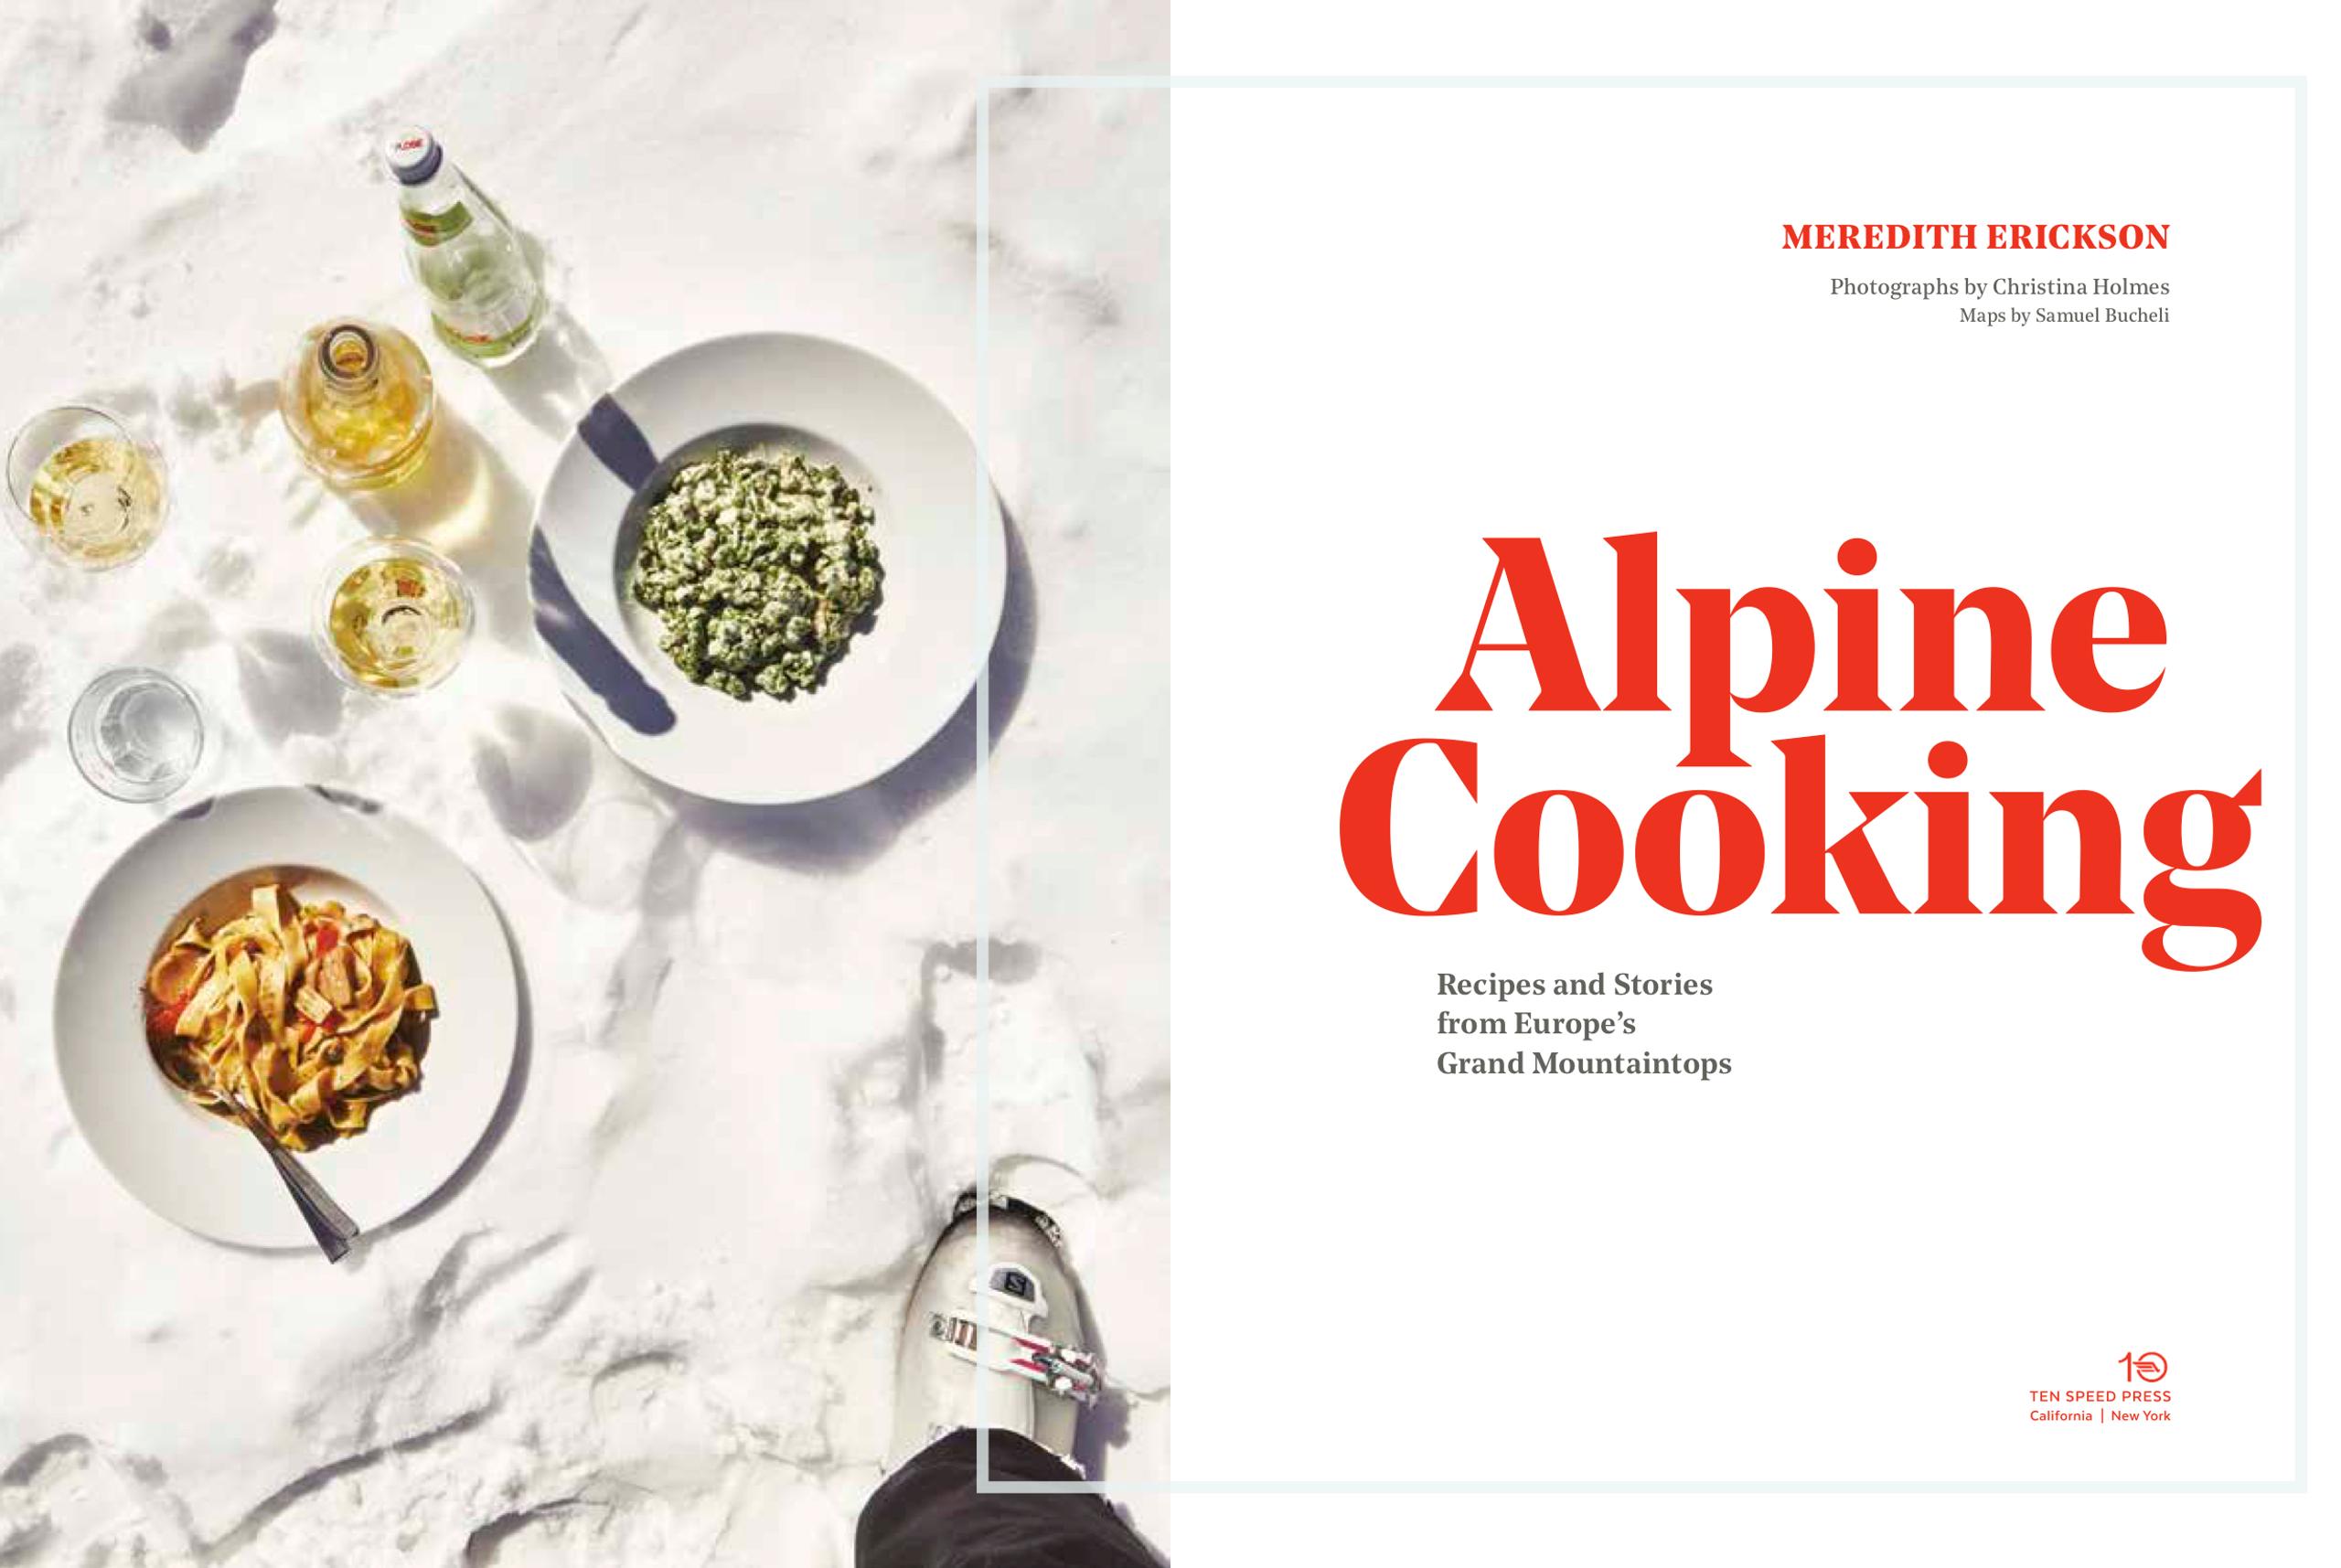 cookbook cover displaying food and drinks and title "Alpine Cooking"